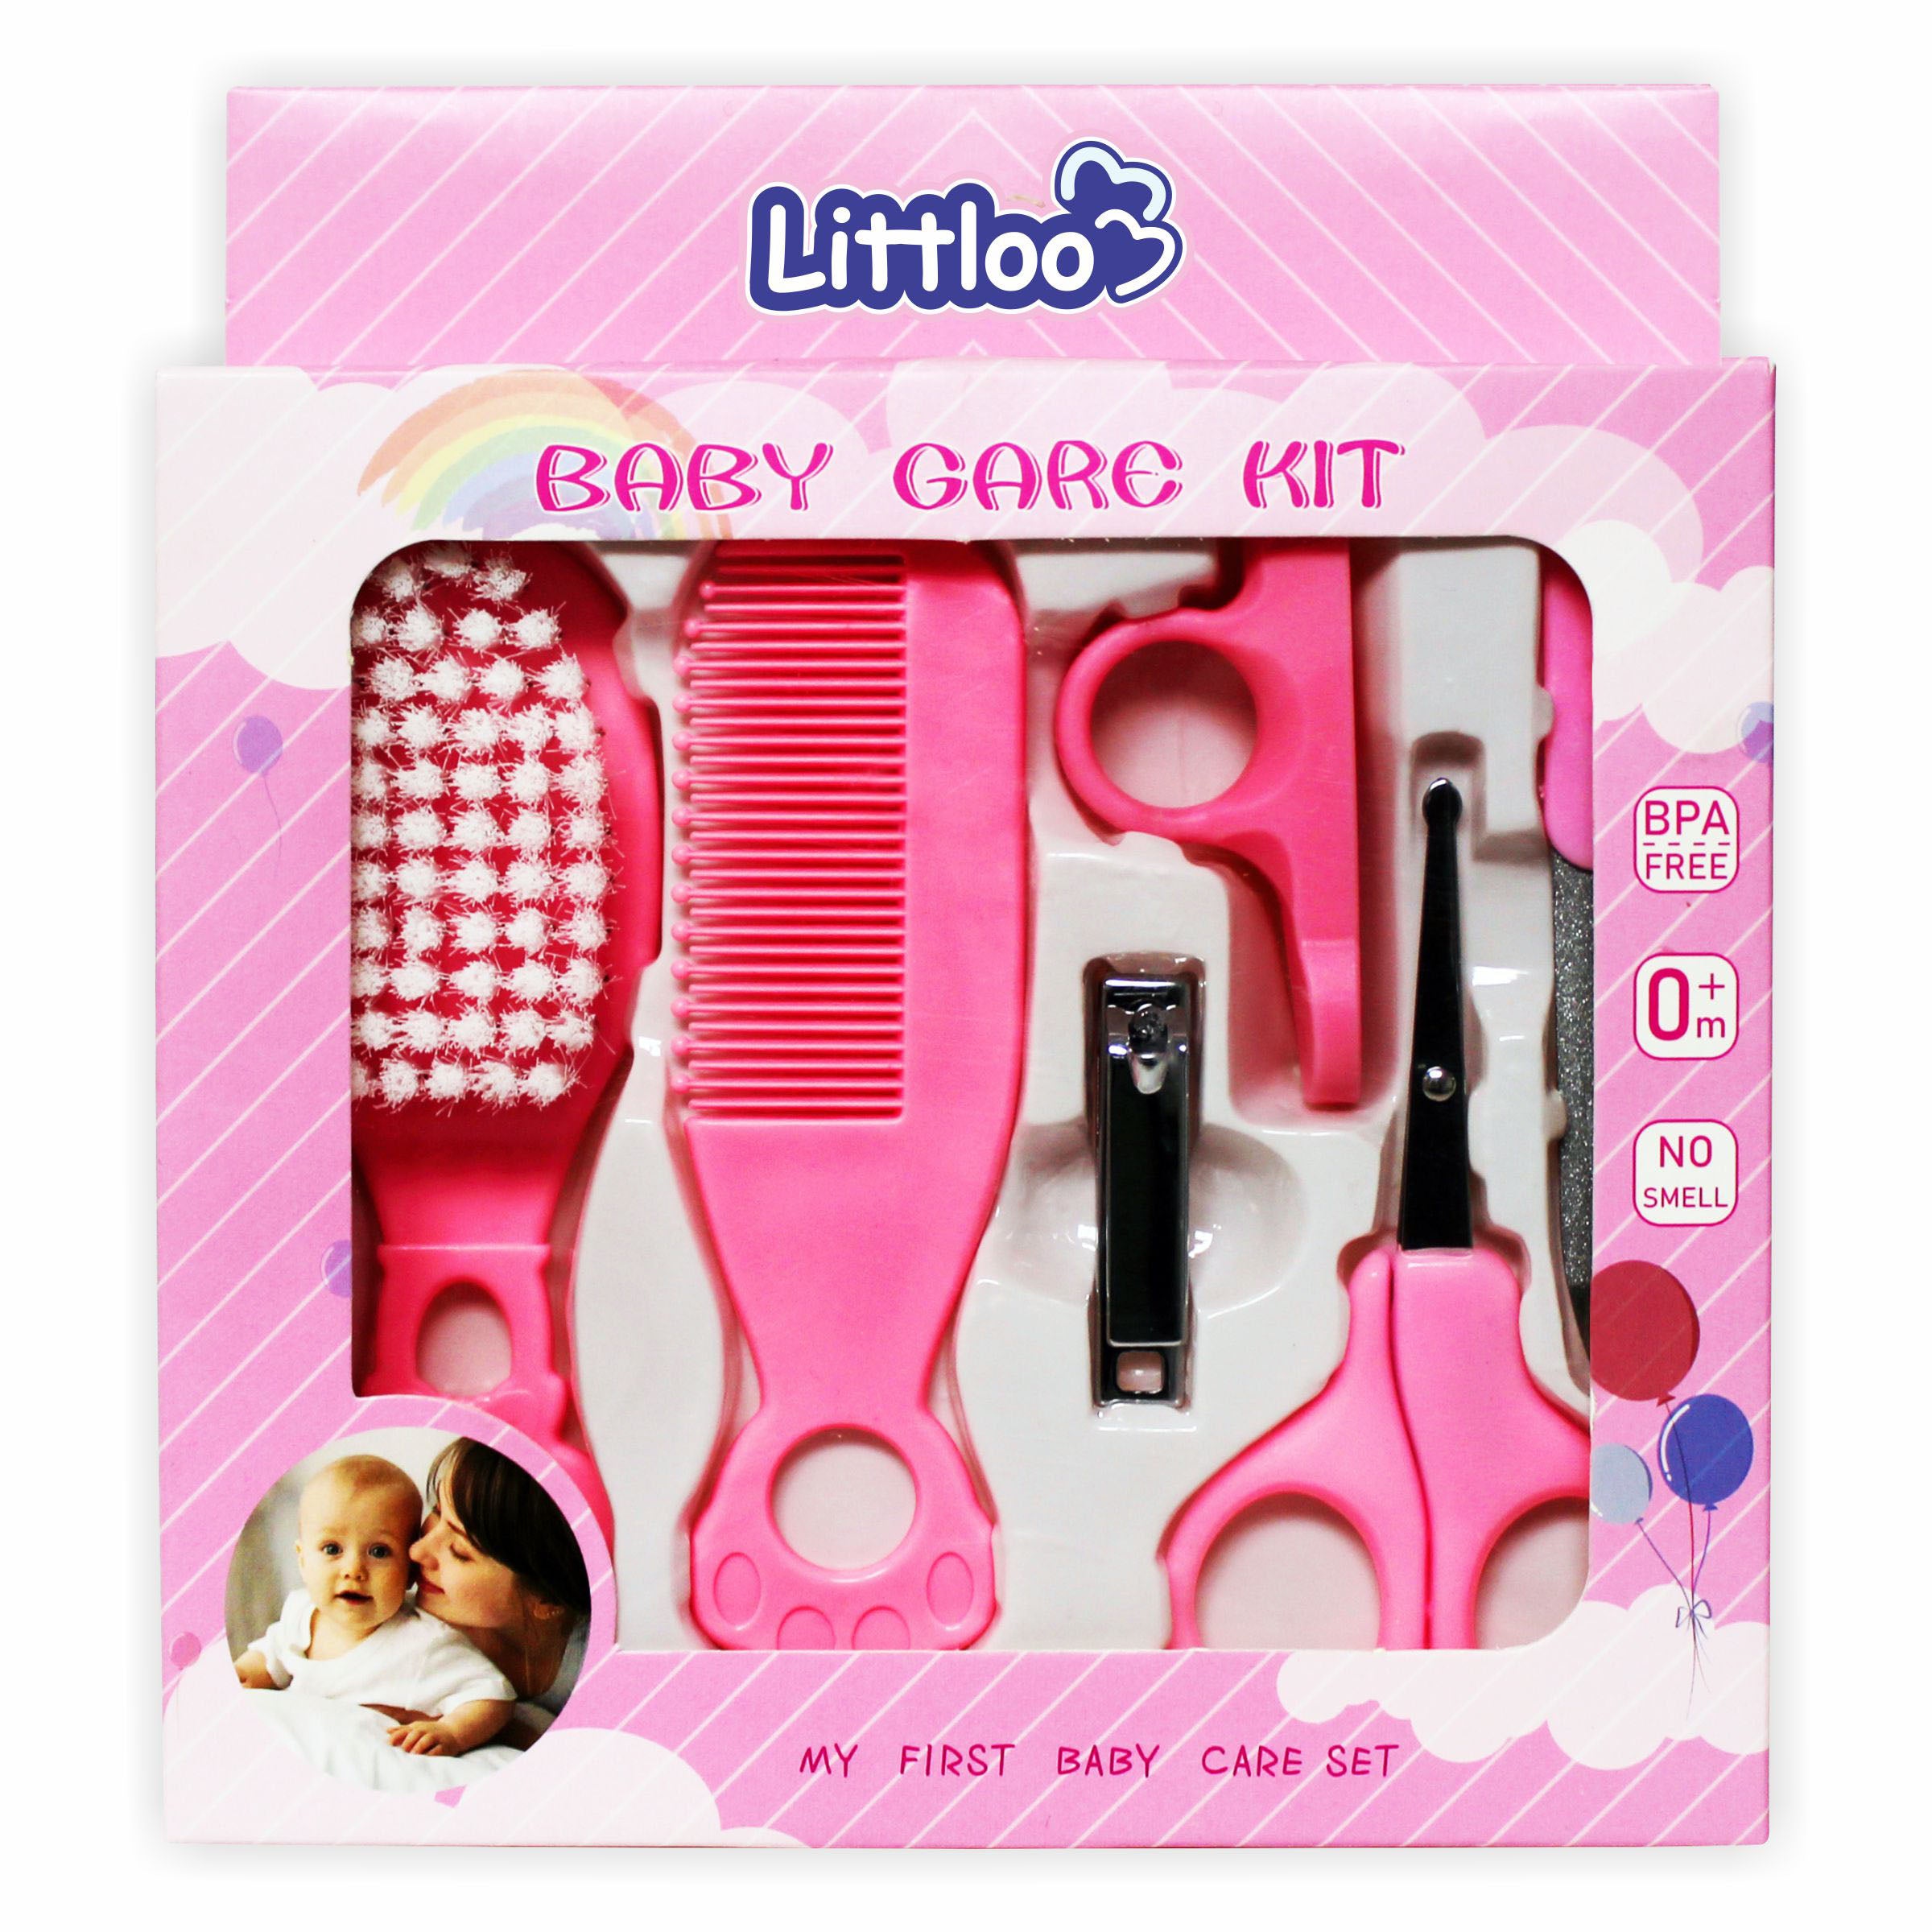 Littloo All in 1 Baby Care Kit for Your Little One! | Hair Brush, Comb, Nail Clipper, Scissors, and Nail Filer - Pink - Littloo